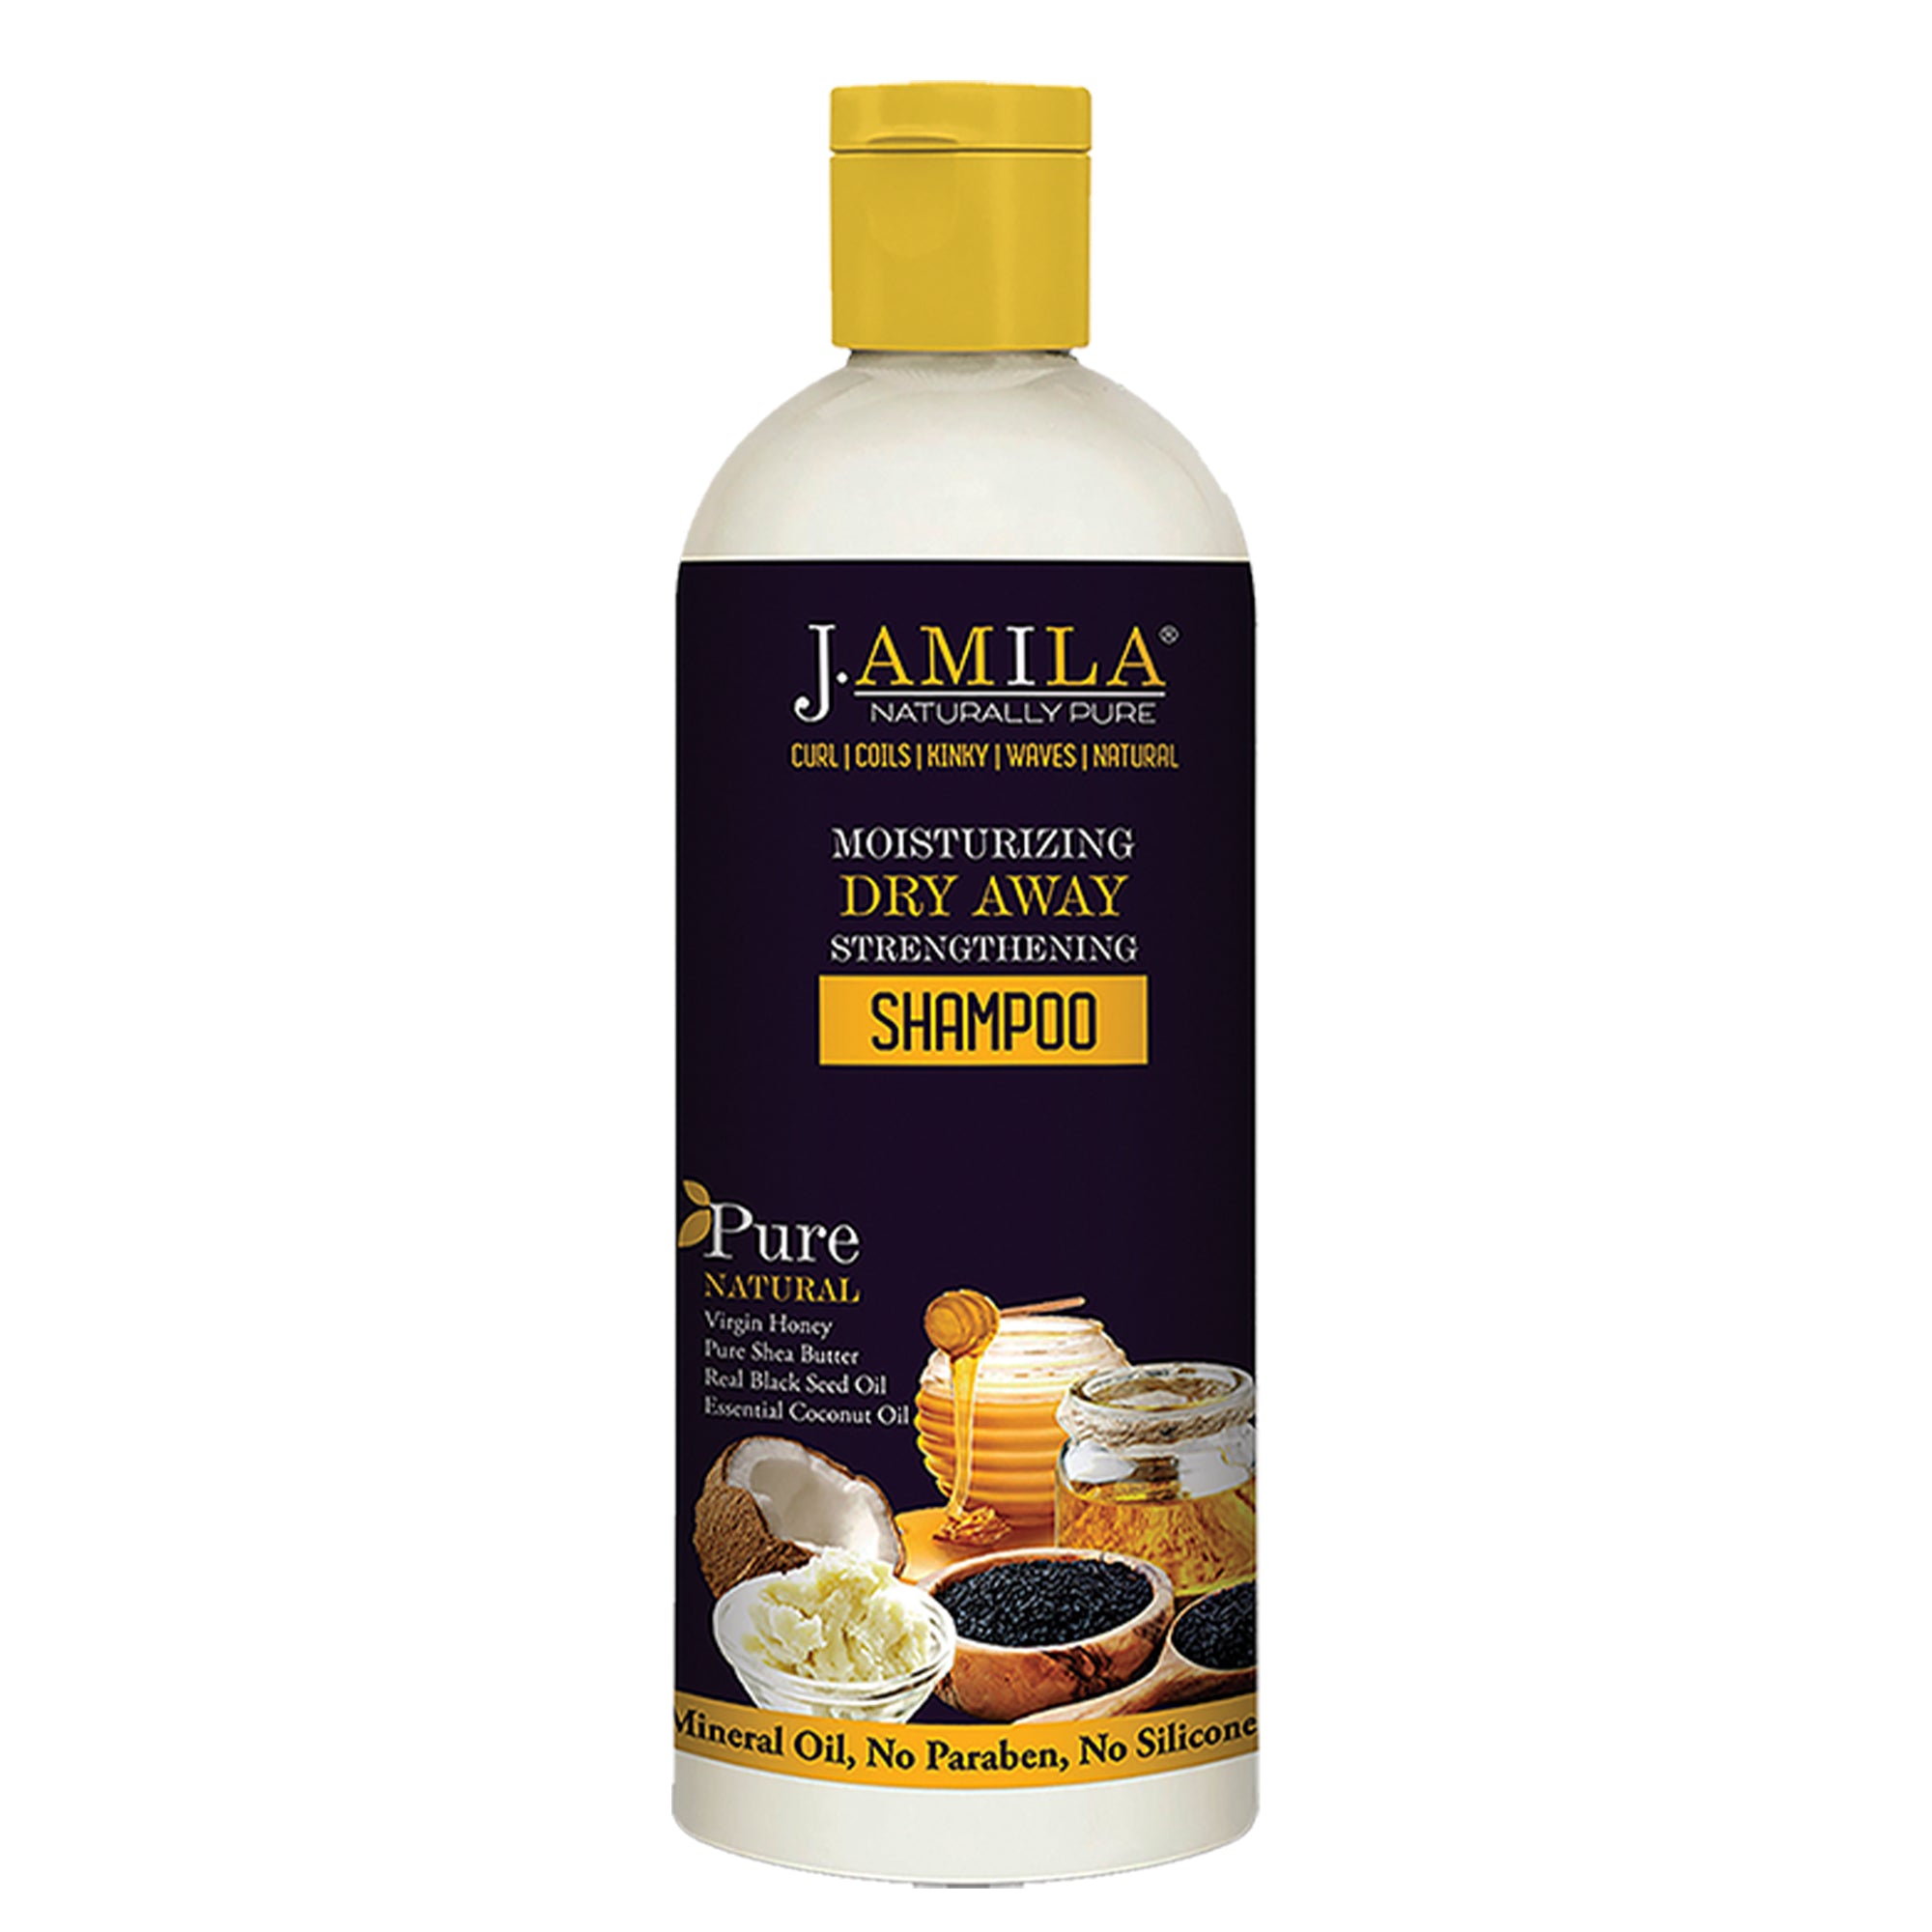 J. AMILA Naturally Hair Care Pure Moisturizing Dry Away Strengthening Shampoo Deeply Moistrizes And Hydrates With Coconut &amp; Black Seed Oil For All Hair Types (12 oz)